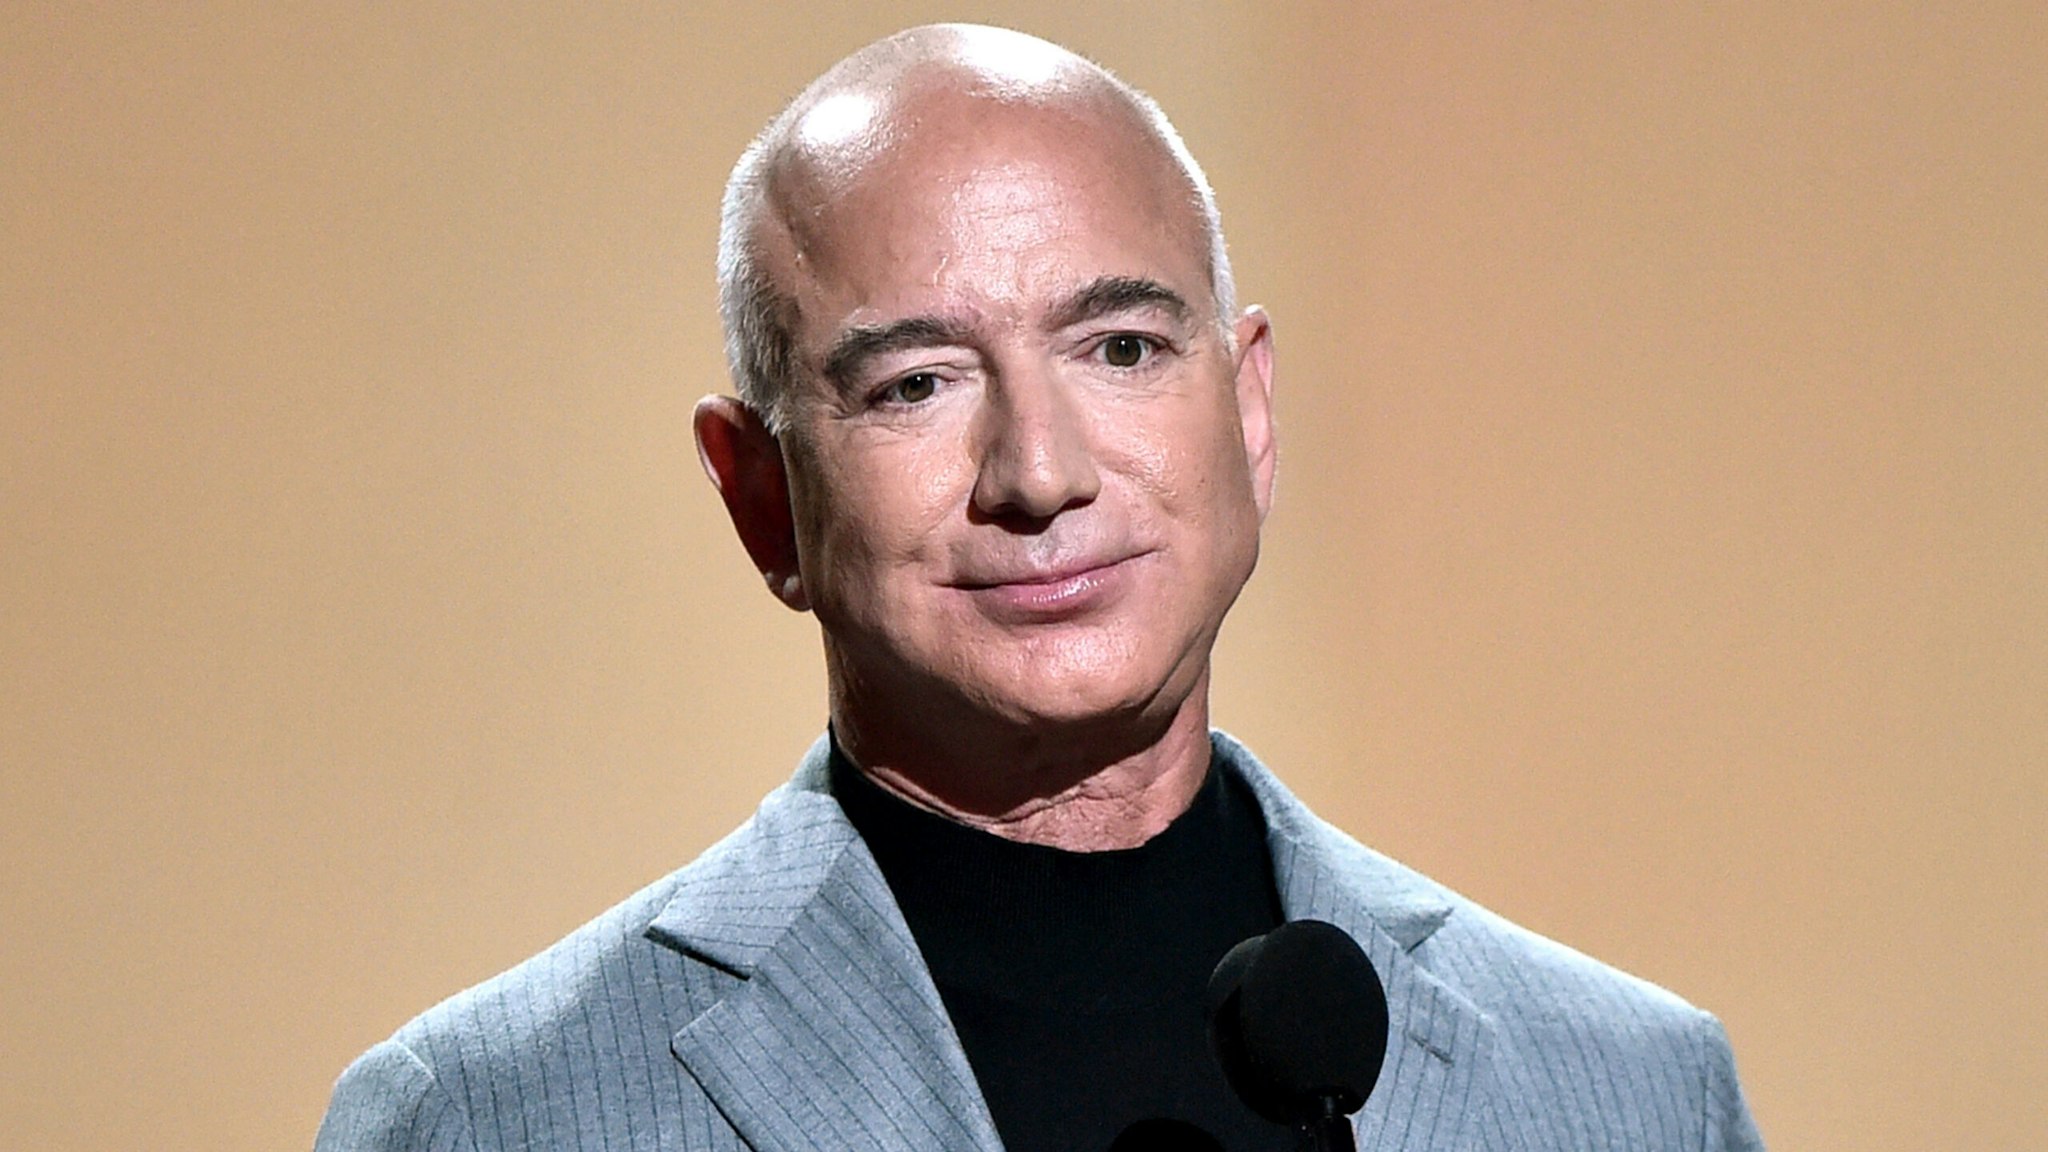 SANTA MONICA, CALIFORNIA - DECEMBER 07: 2021 PEOPLE'S CHOICE AWARDS -- Pictured: Jeff Bezos speaks on stage during the 2021 People's Choice Awards held at Barker Hangar on December 7, 2021 in Santa Monica, California.